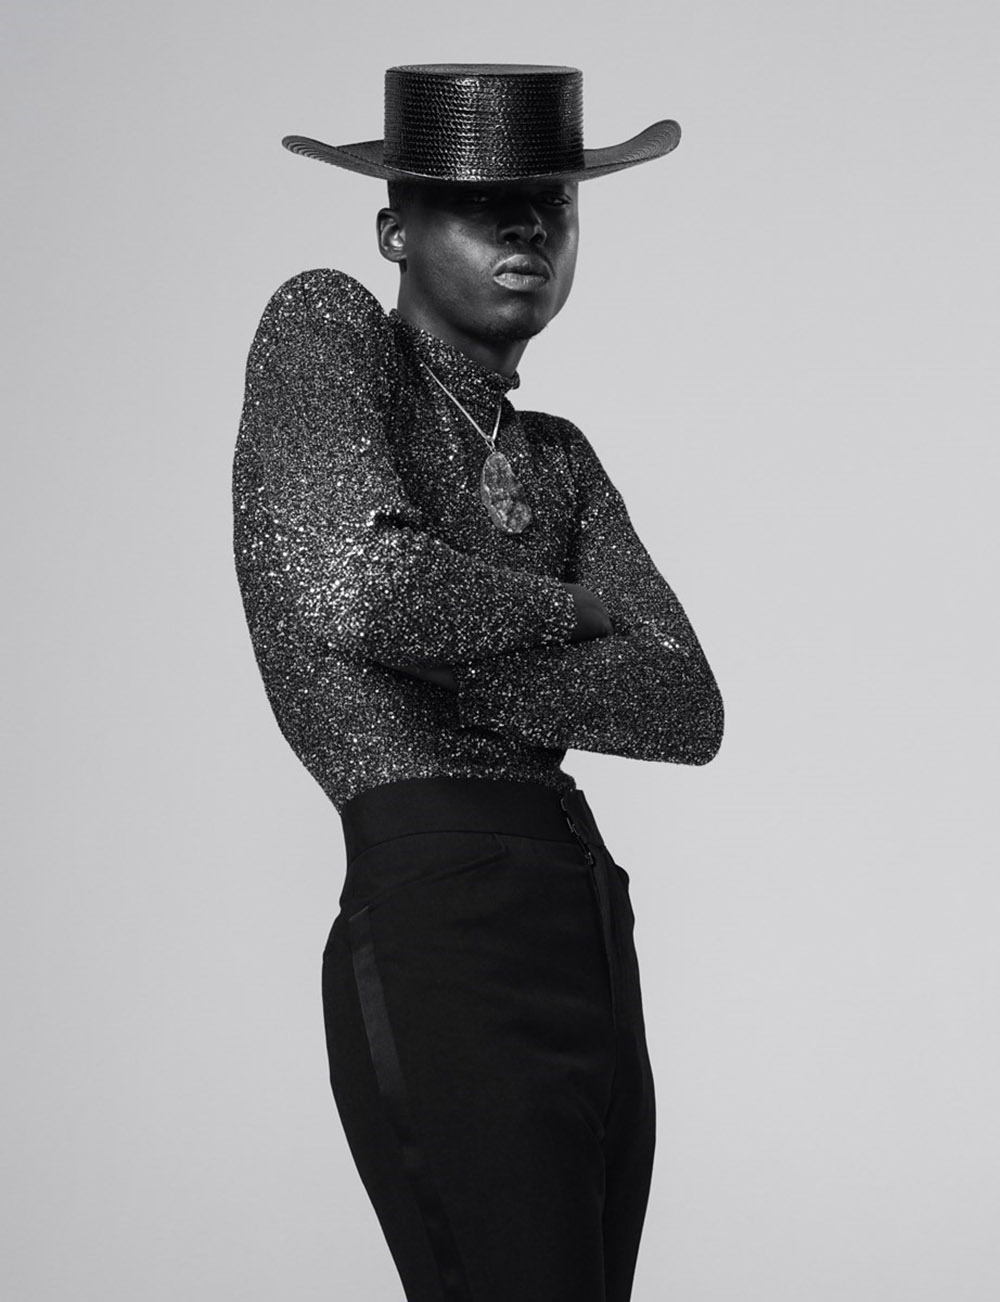 Ashton Sanders covers AnOther Man Spring Summer 2019 by Ethan James Green